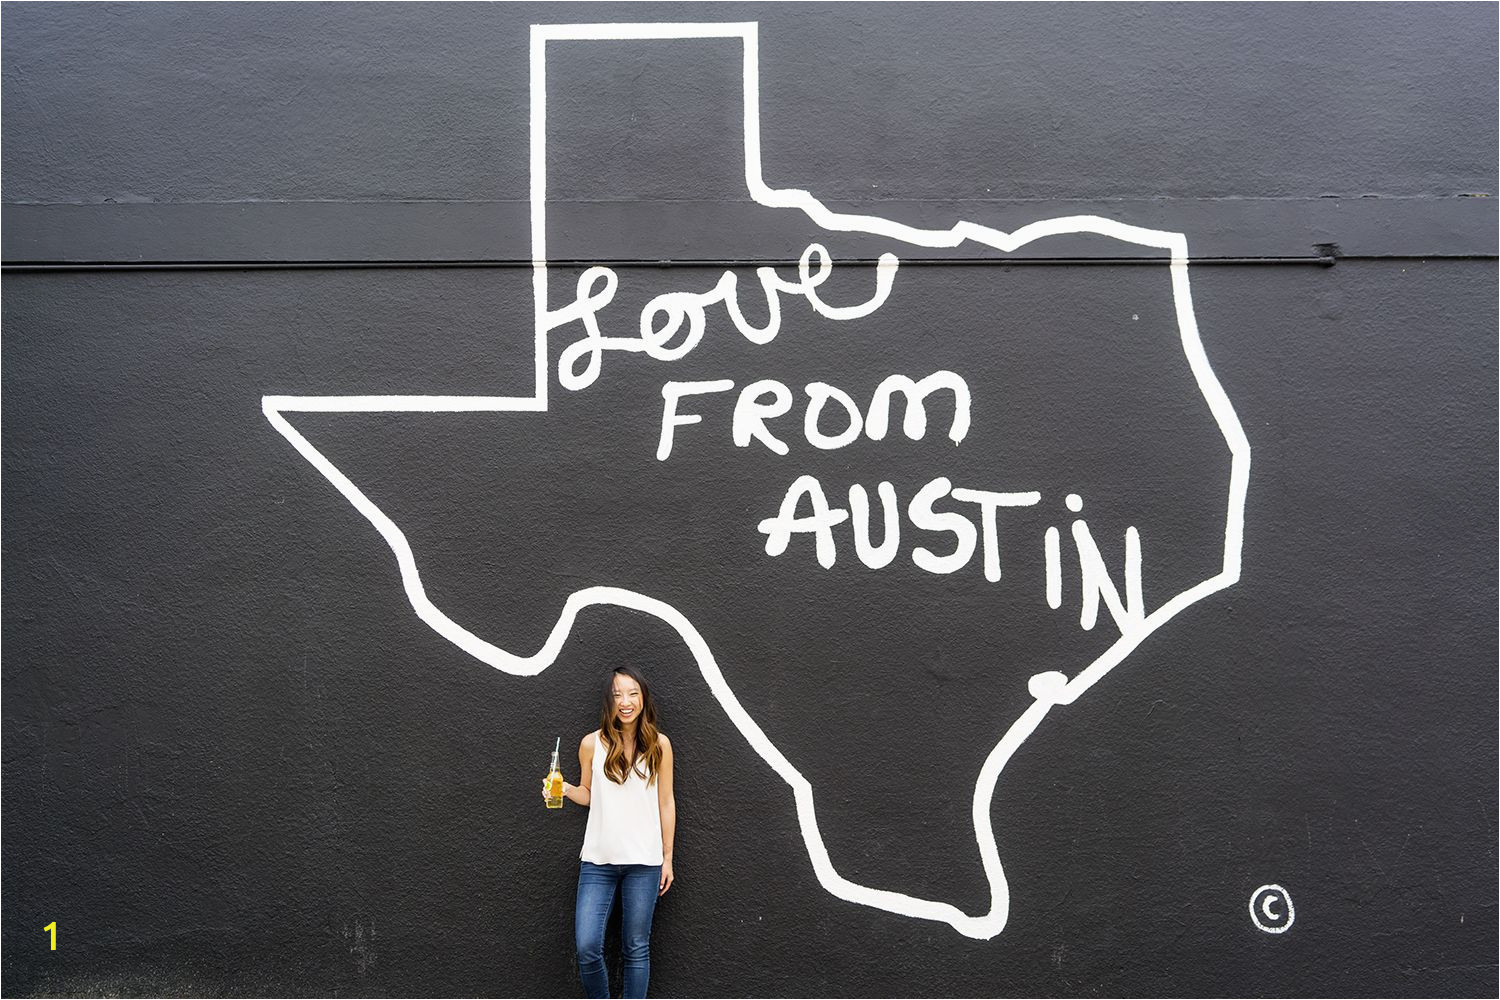 Austin Mural Wall Location 24 Most Instagrammable Murals In Austin